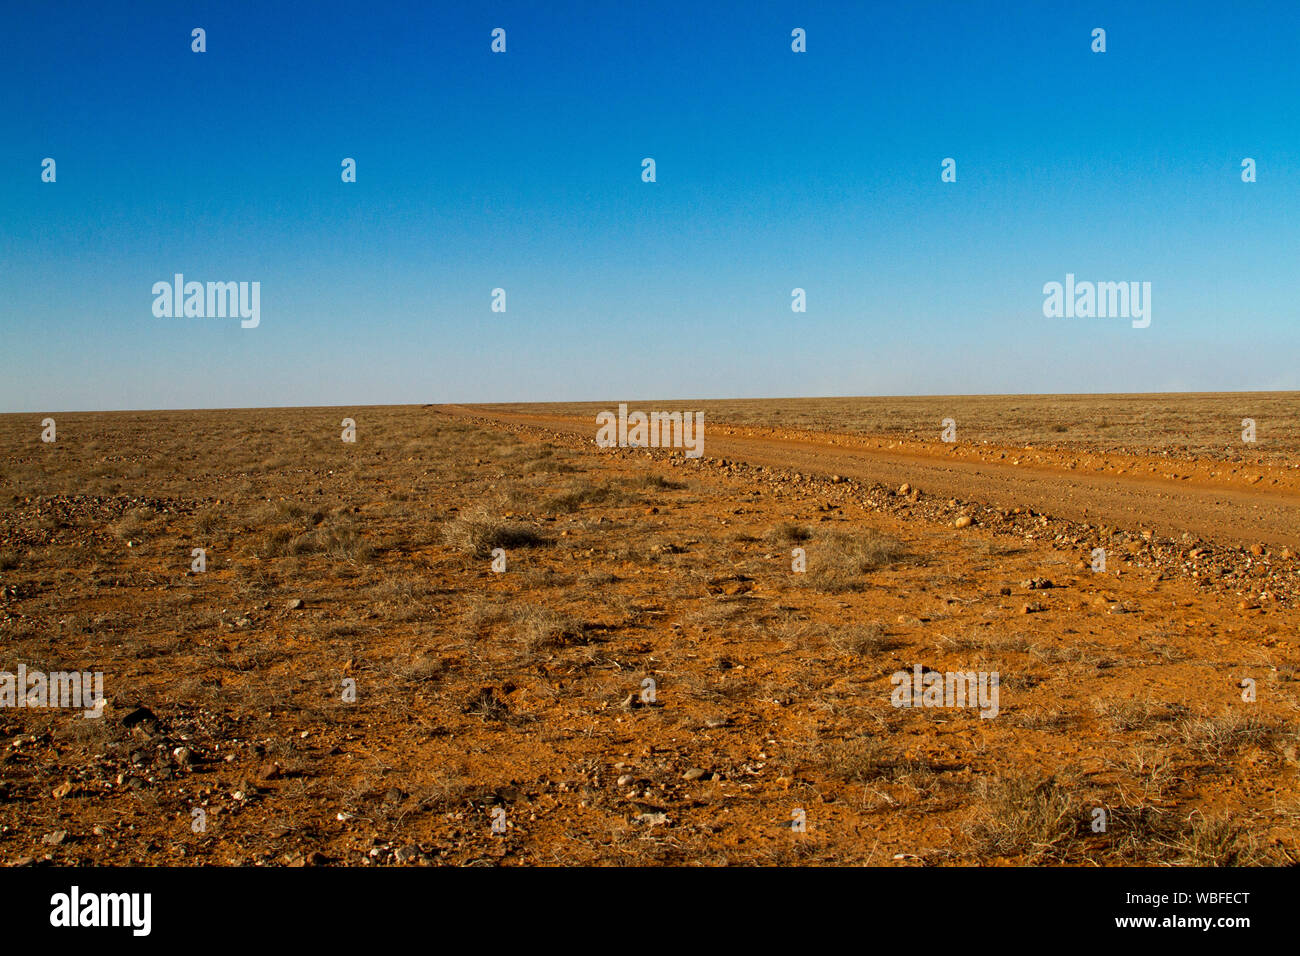 Outback landscape with road, Strzelecki track, stretching across barren red plains to distant horizon under blue sky during drought in South Australia Stock Photo